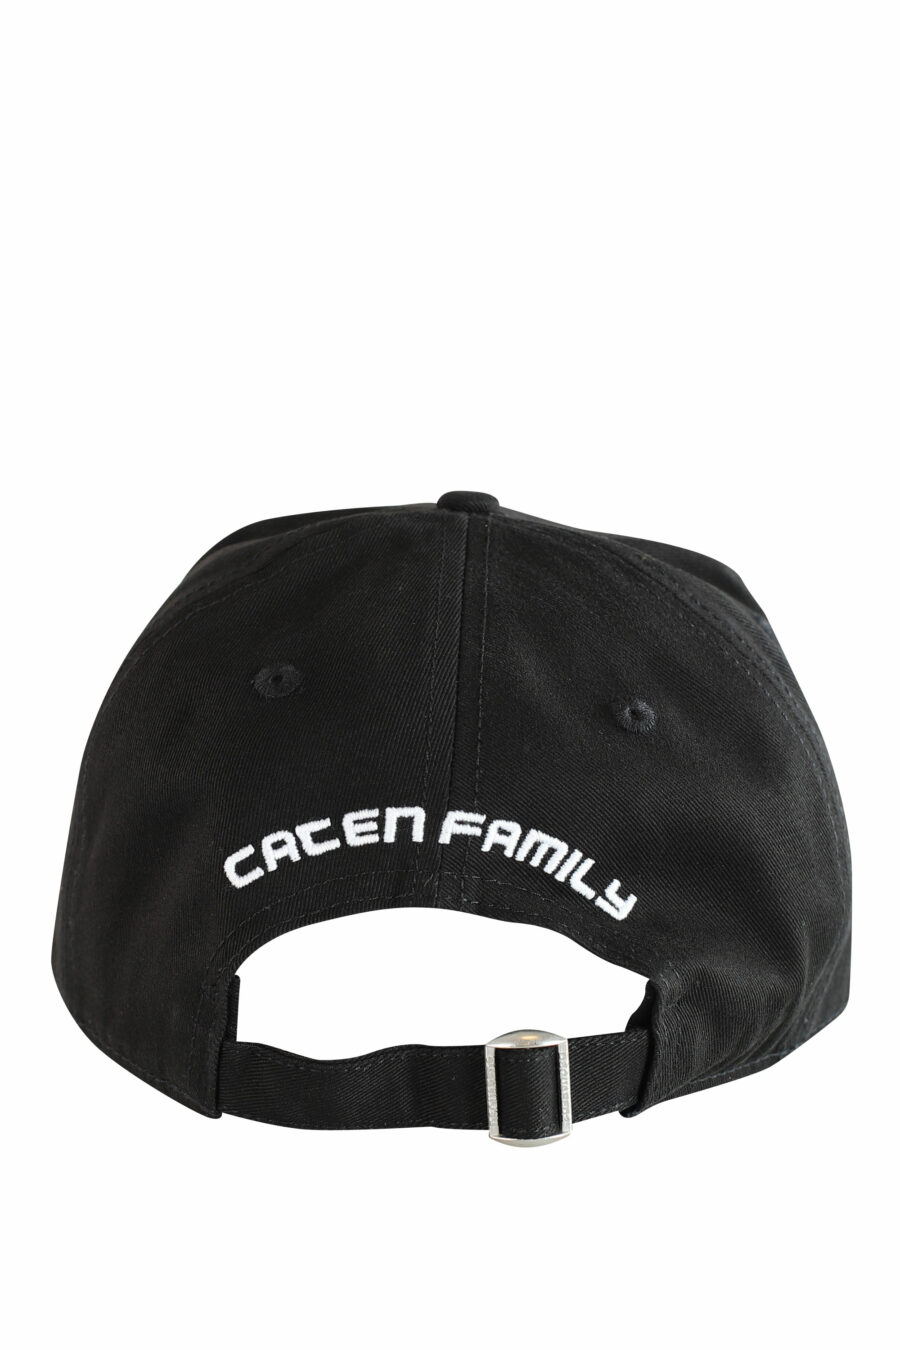 Black cap with white logo and "cacen family" leaf - IMG 1217